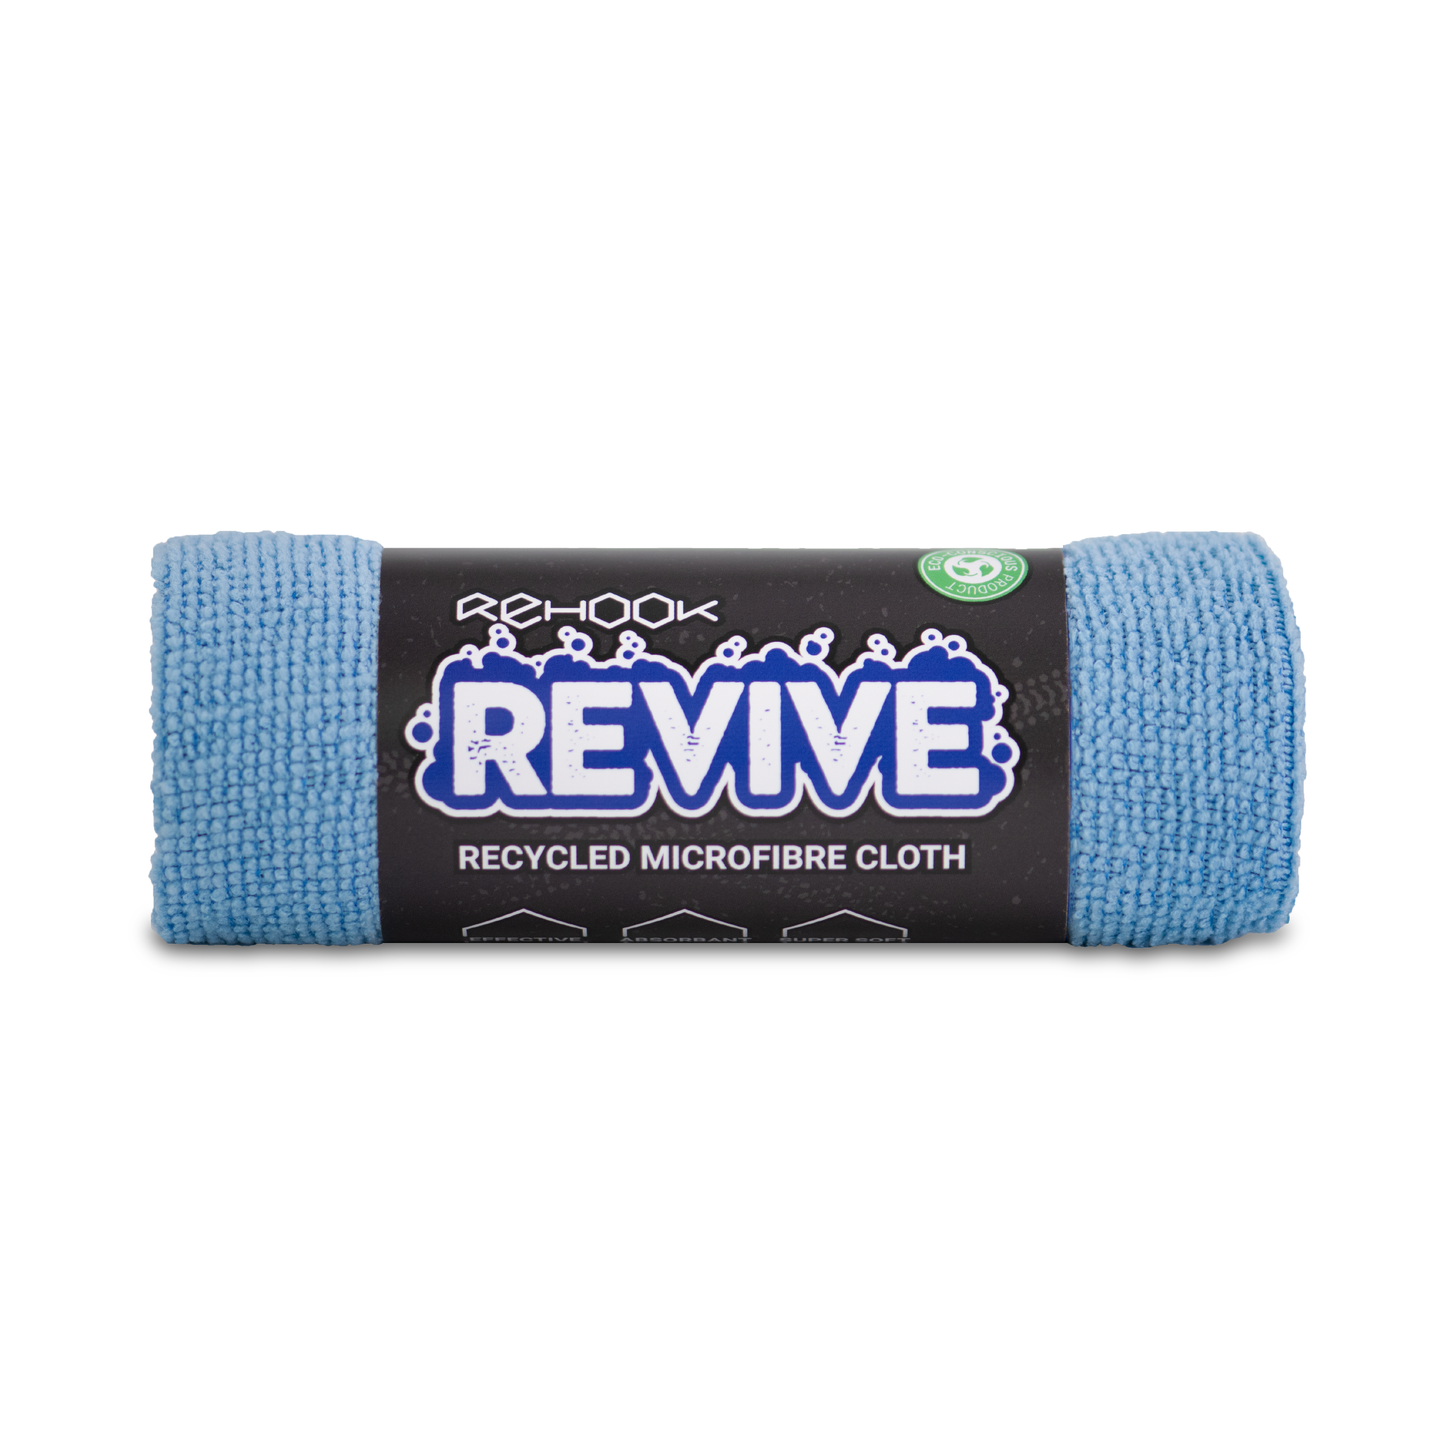 Revive Recycled Microfibre Cloth